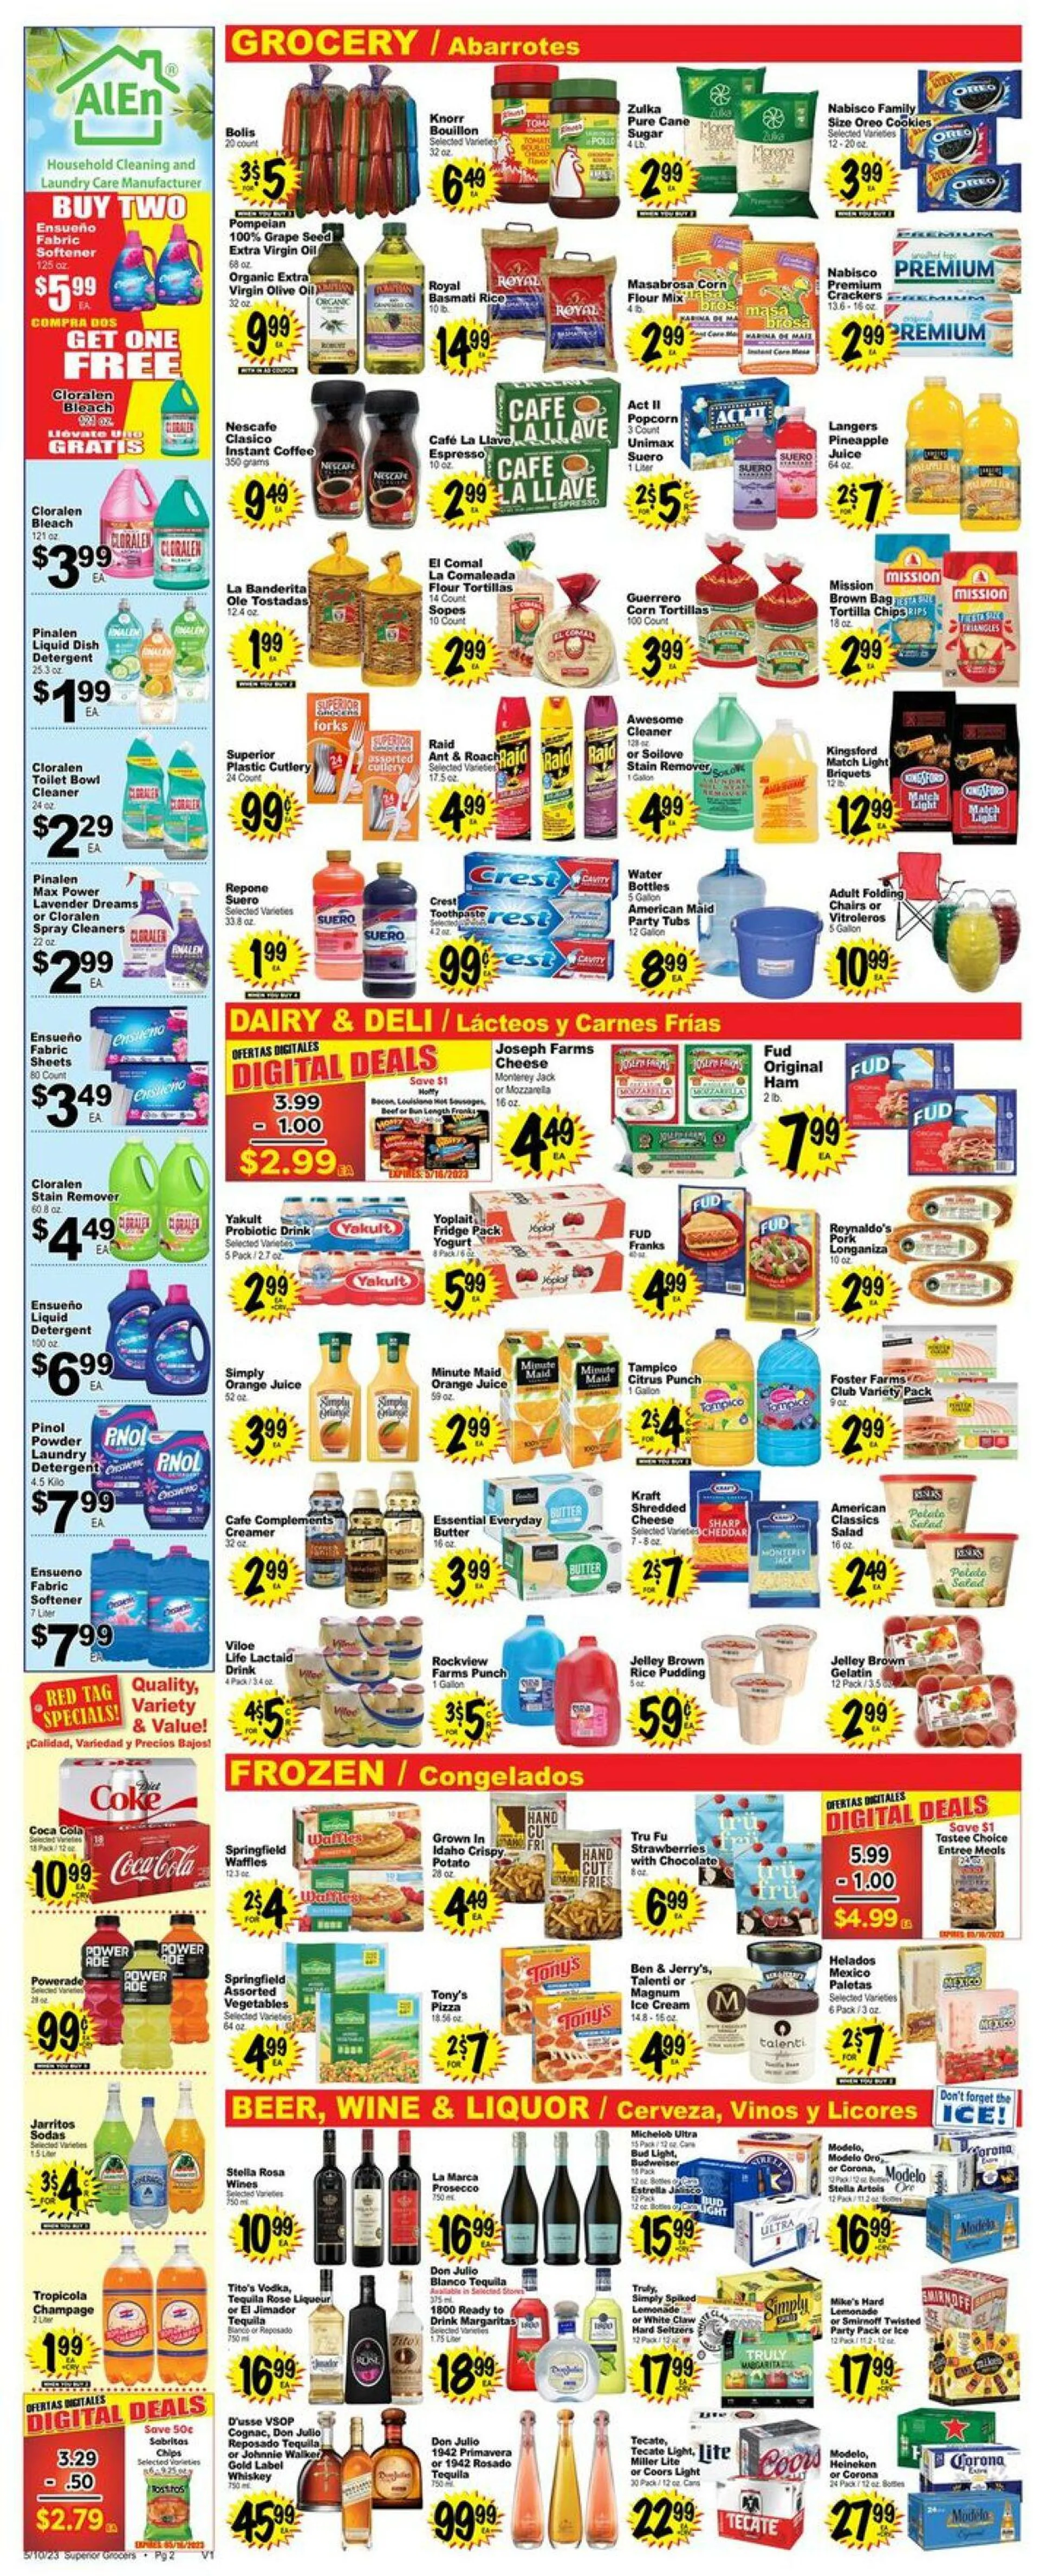 Superior Grocers Current weekly ad - 2